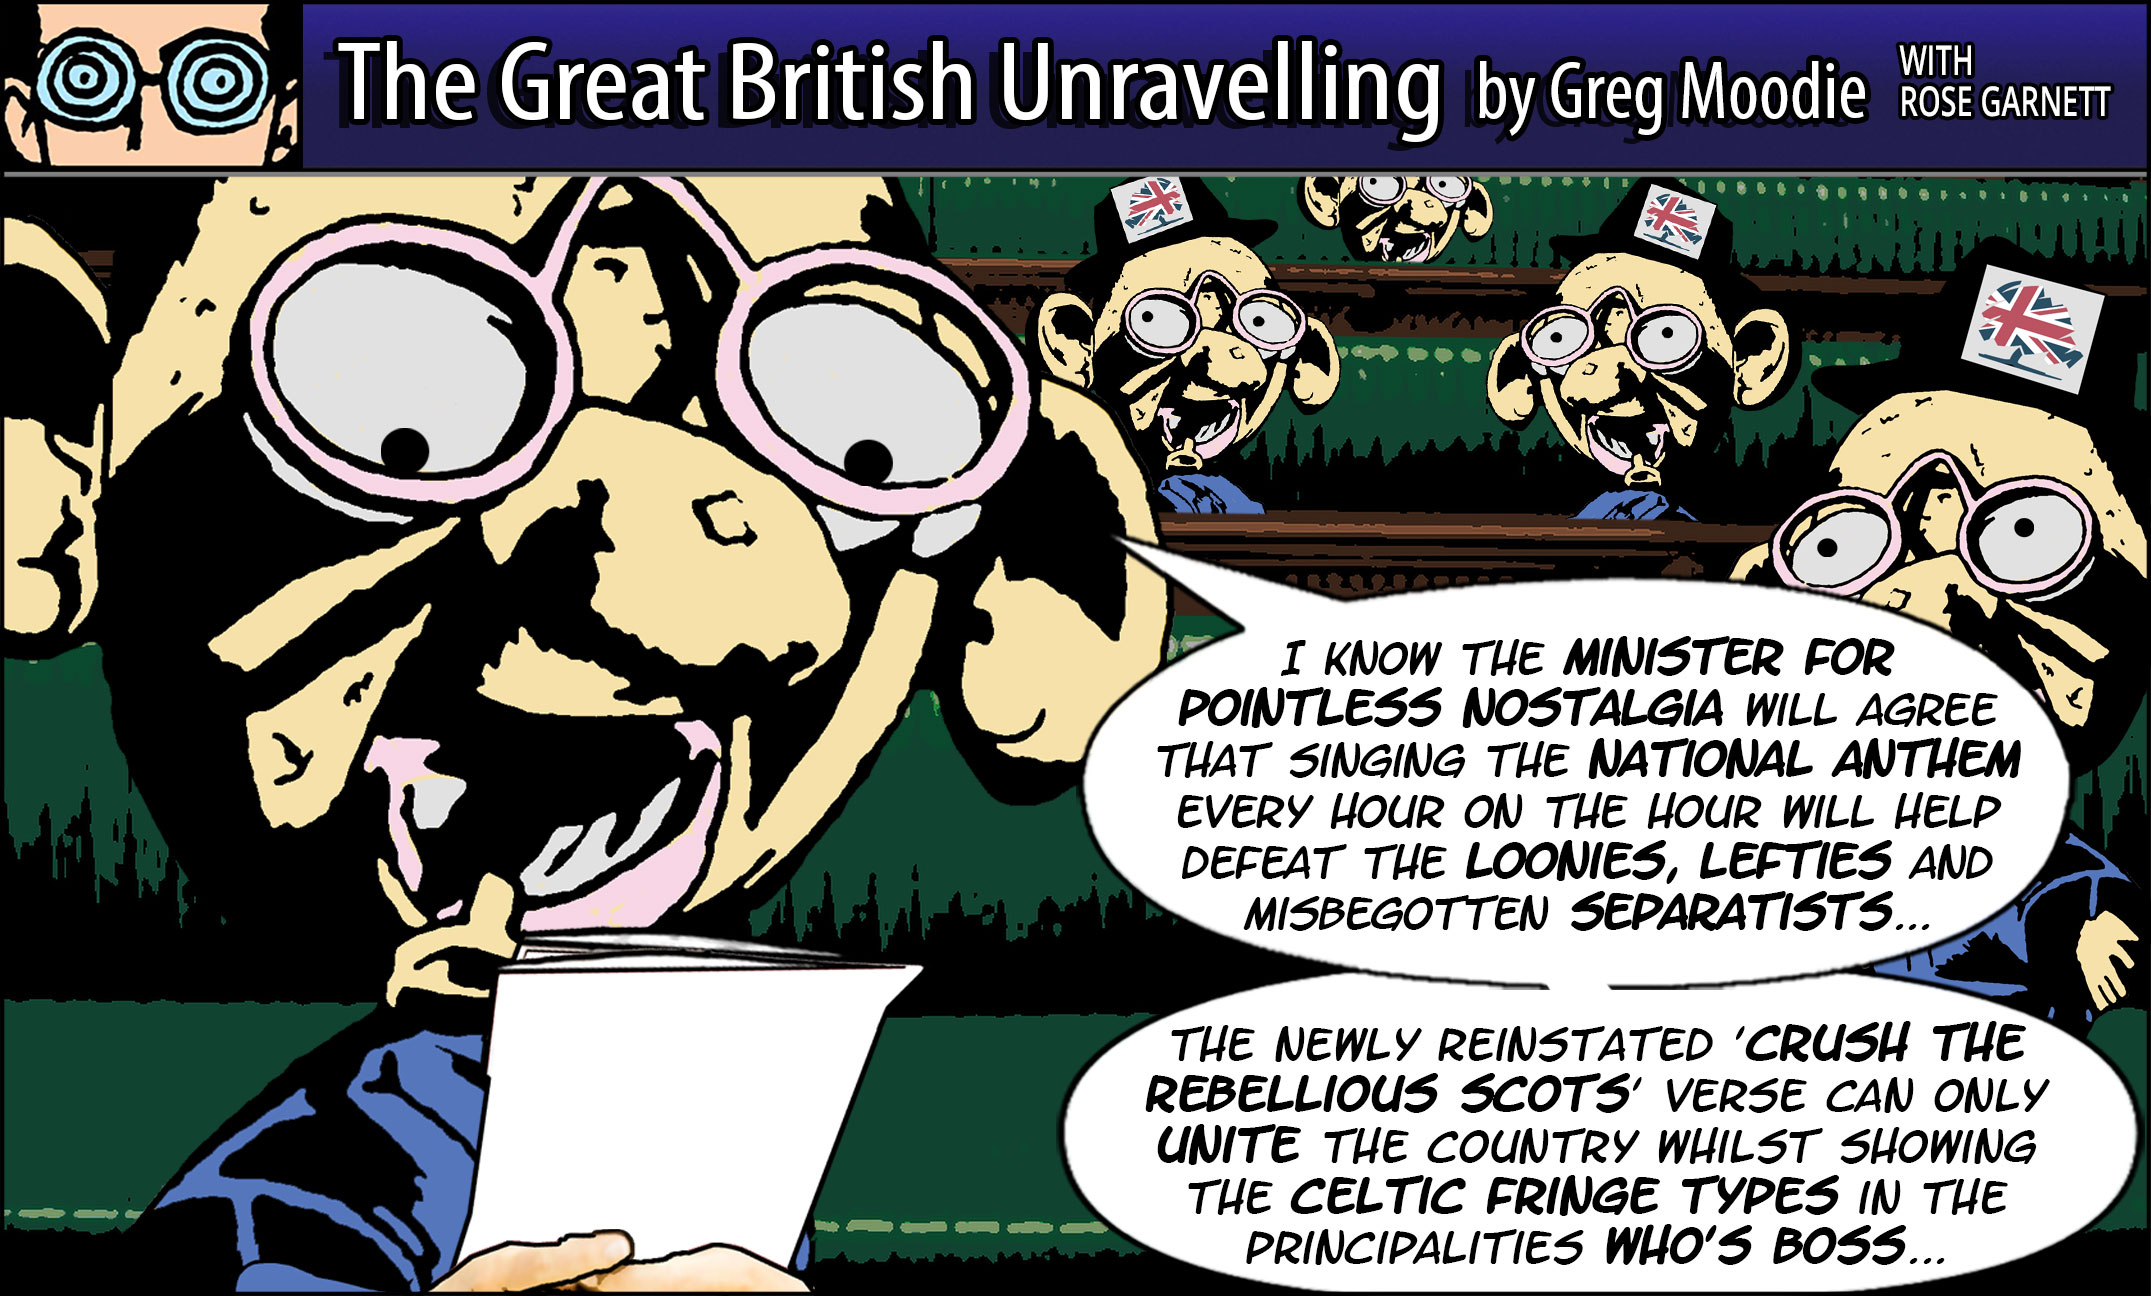 The Great British Unravelling